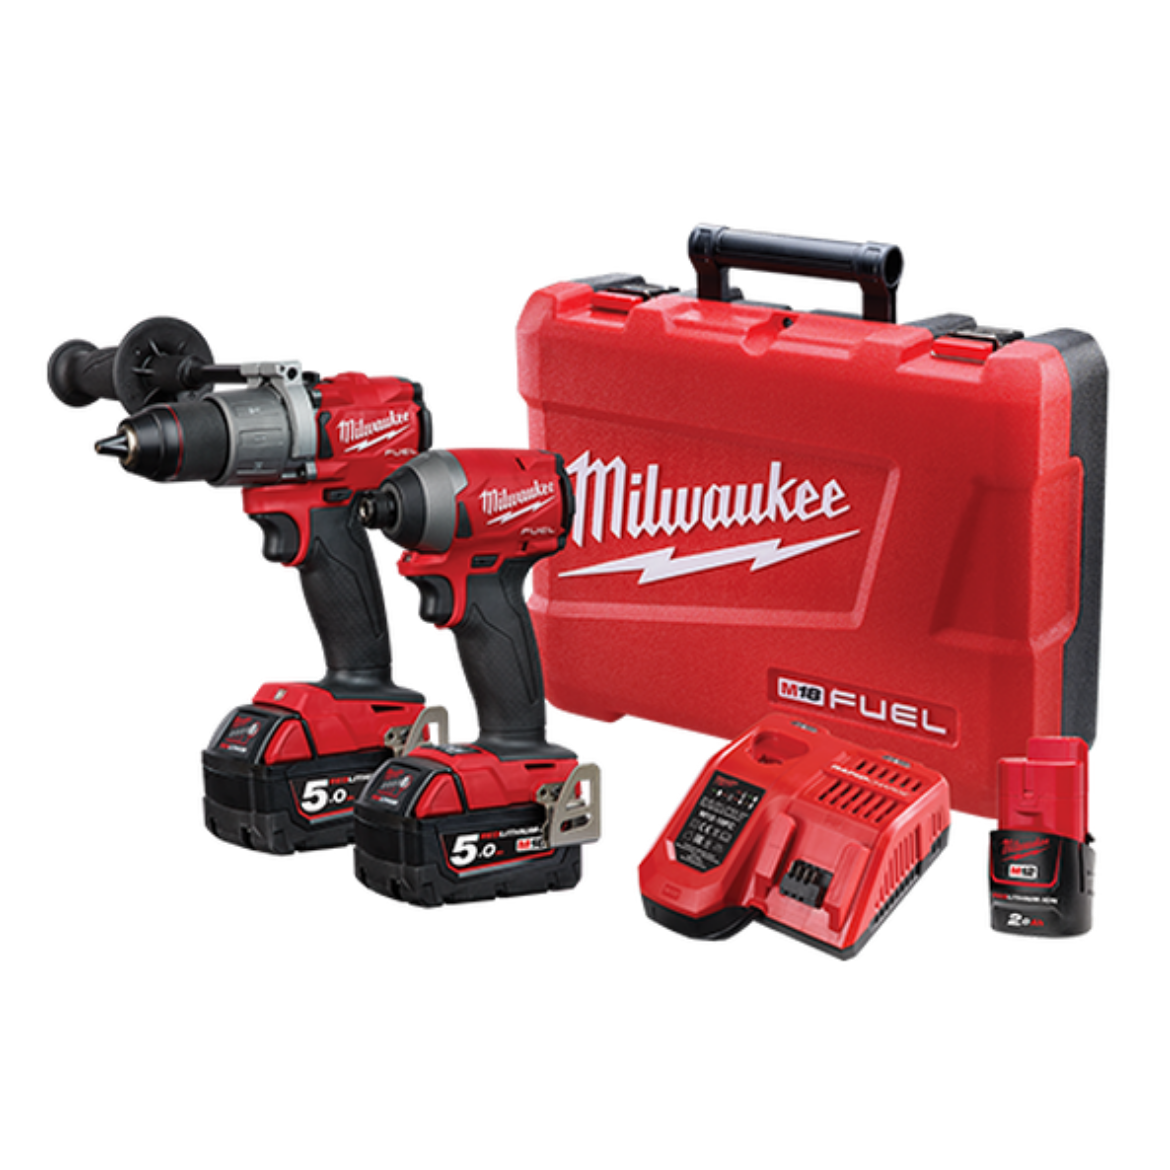 Picture of MILWAUKEE GEN III FUEL 18V 2 PIECE 5AH COMBO (Contains:1x M18FPD2-0 Hammer Drill/Driver, 1x M18FID2-0 Hex Impact Driver, 2x 5.0Ah Batteries, Bonus 12V 2.0Ah Battery, Carry Case)